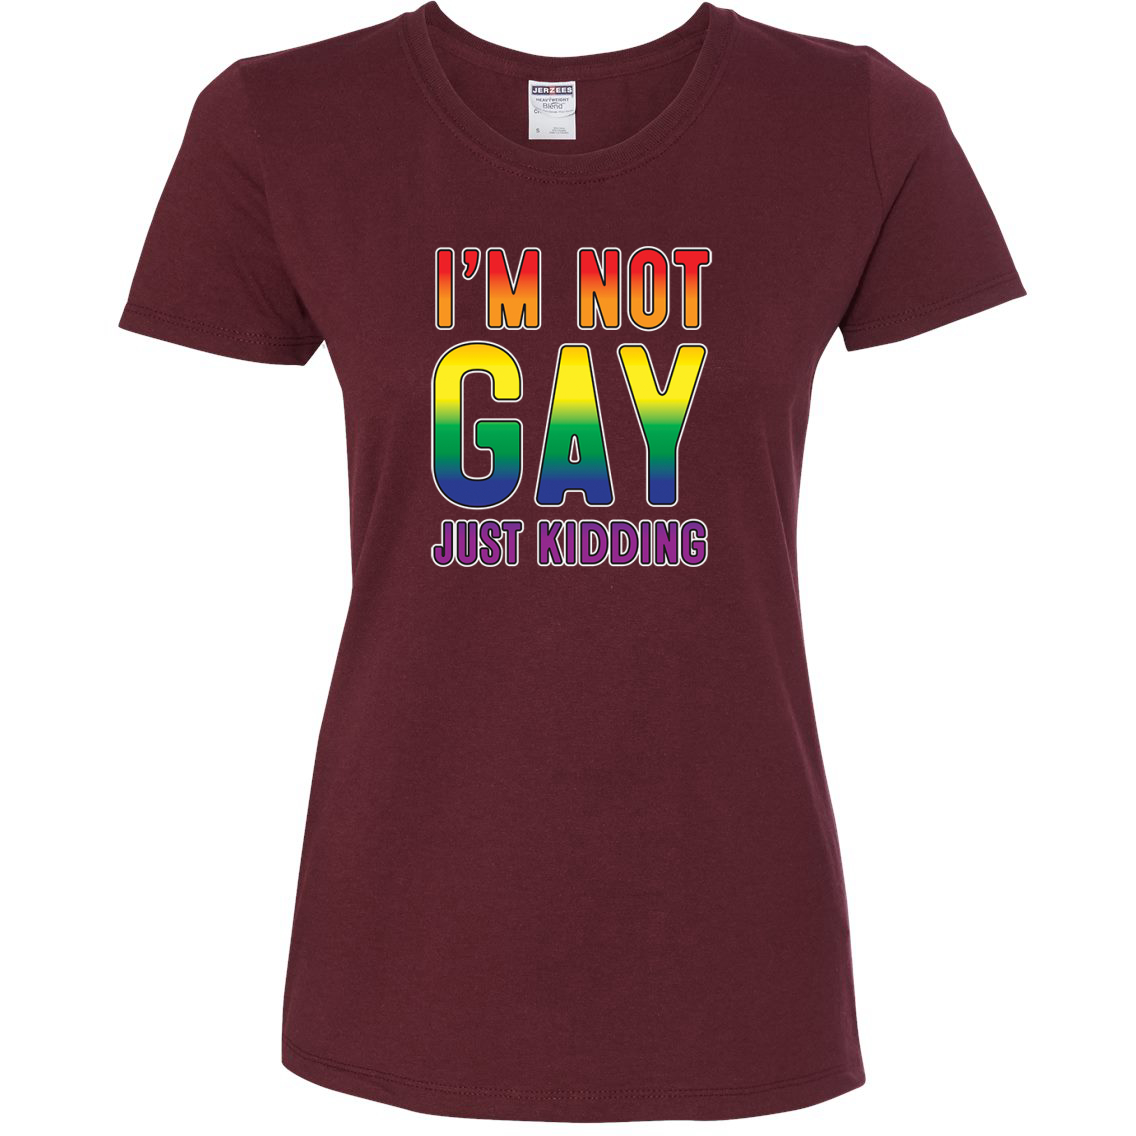 I'm Not Gay Just Kidding LGBT Pride Womens Graphic T-Shirt - image 1 of 1